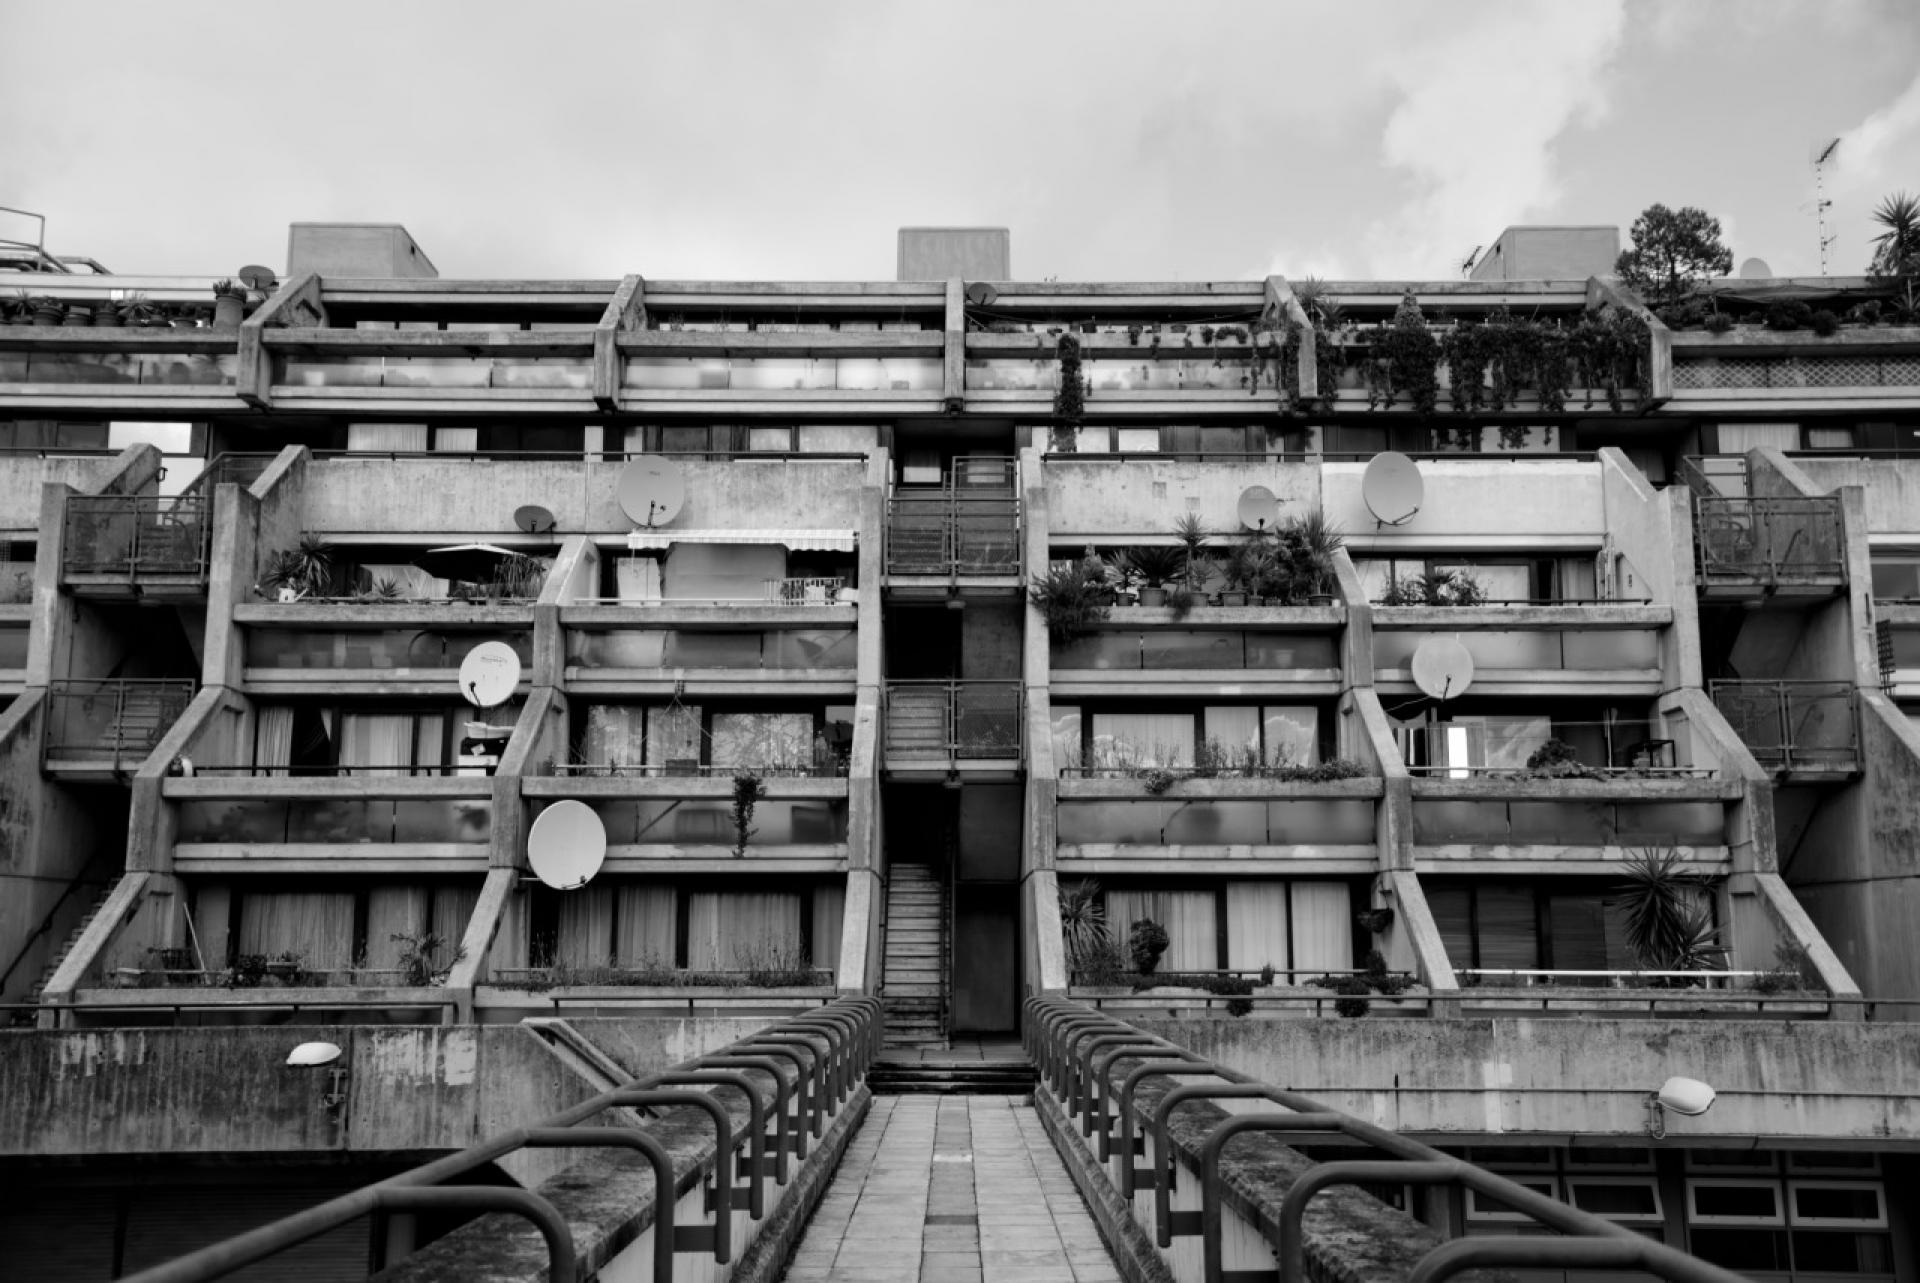 Alexandra Road Estate was designed by Naeve Brown (1972).